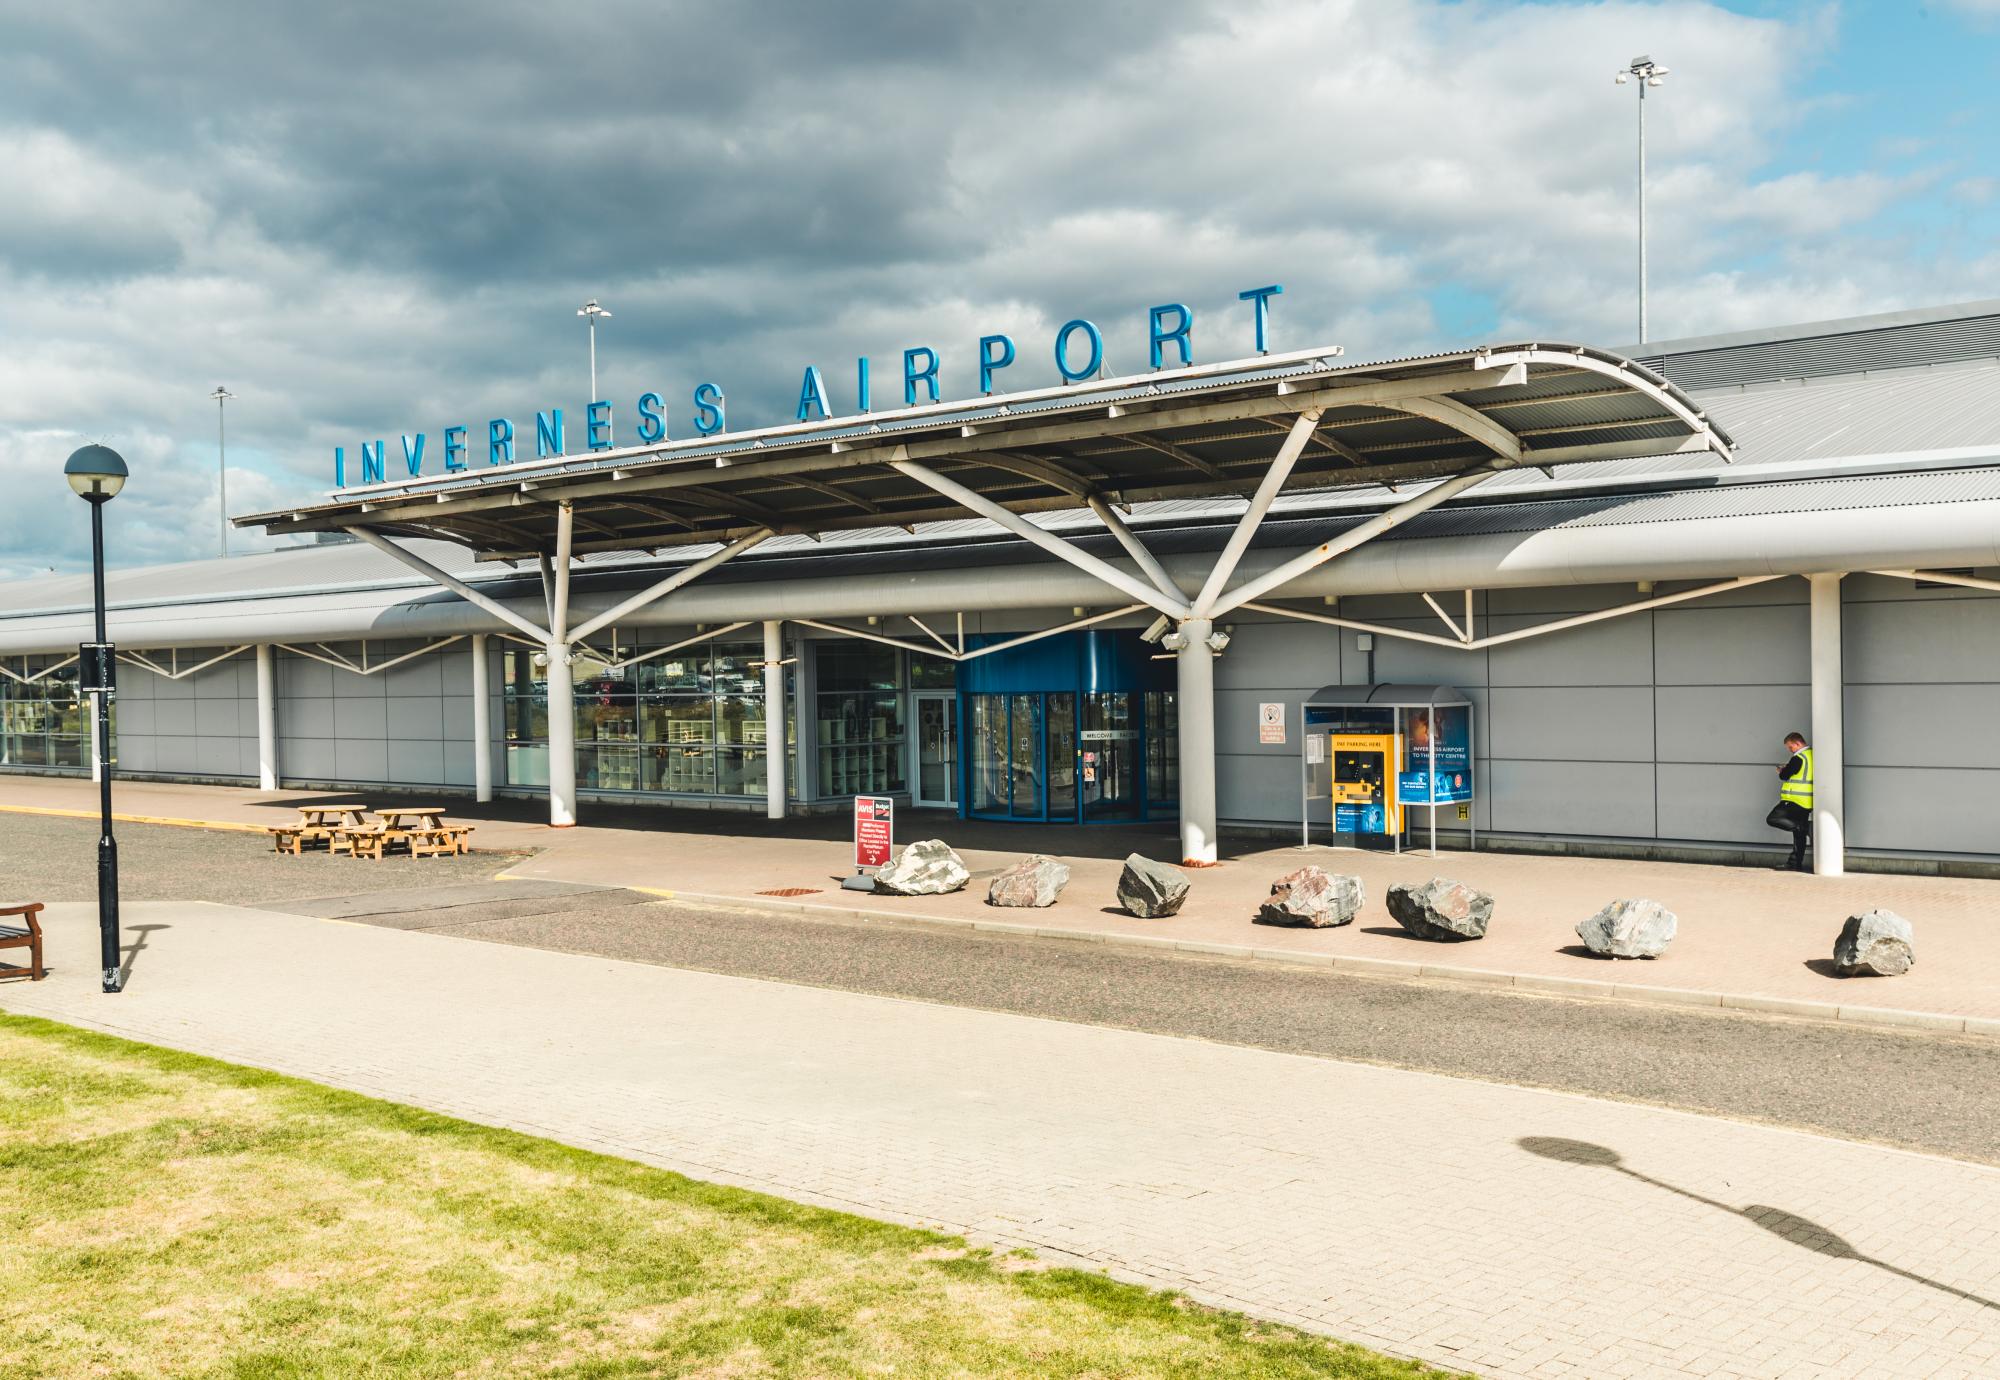 Inverness Airport   